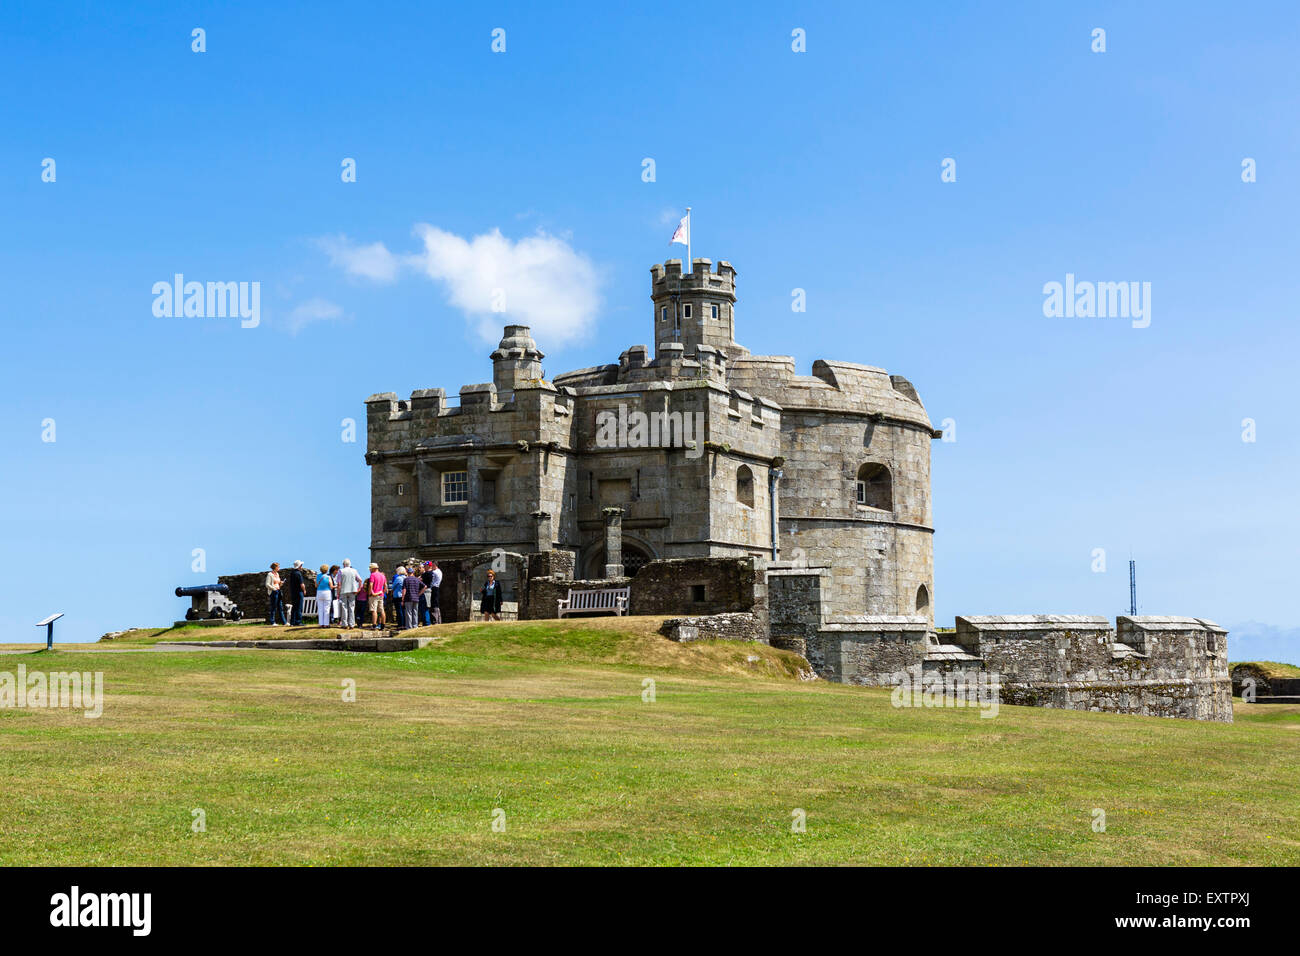 Tourists in front of the Keep at Pendennis Castle, Falmouth, Cornwall, England, UK Stock Photo